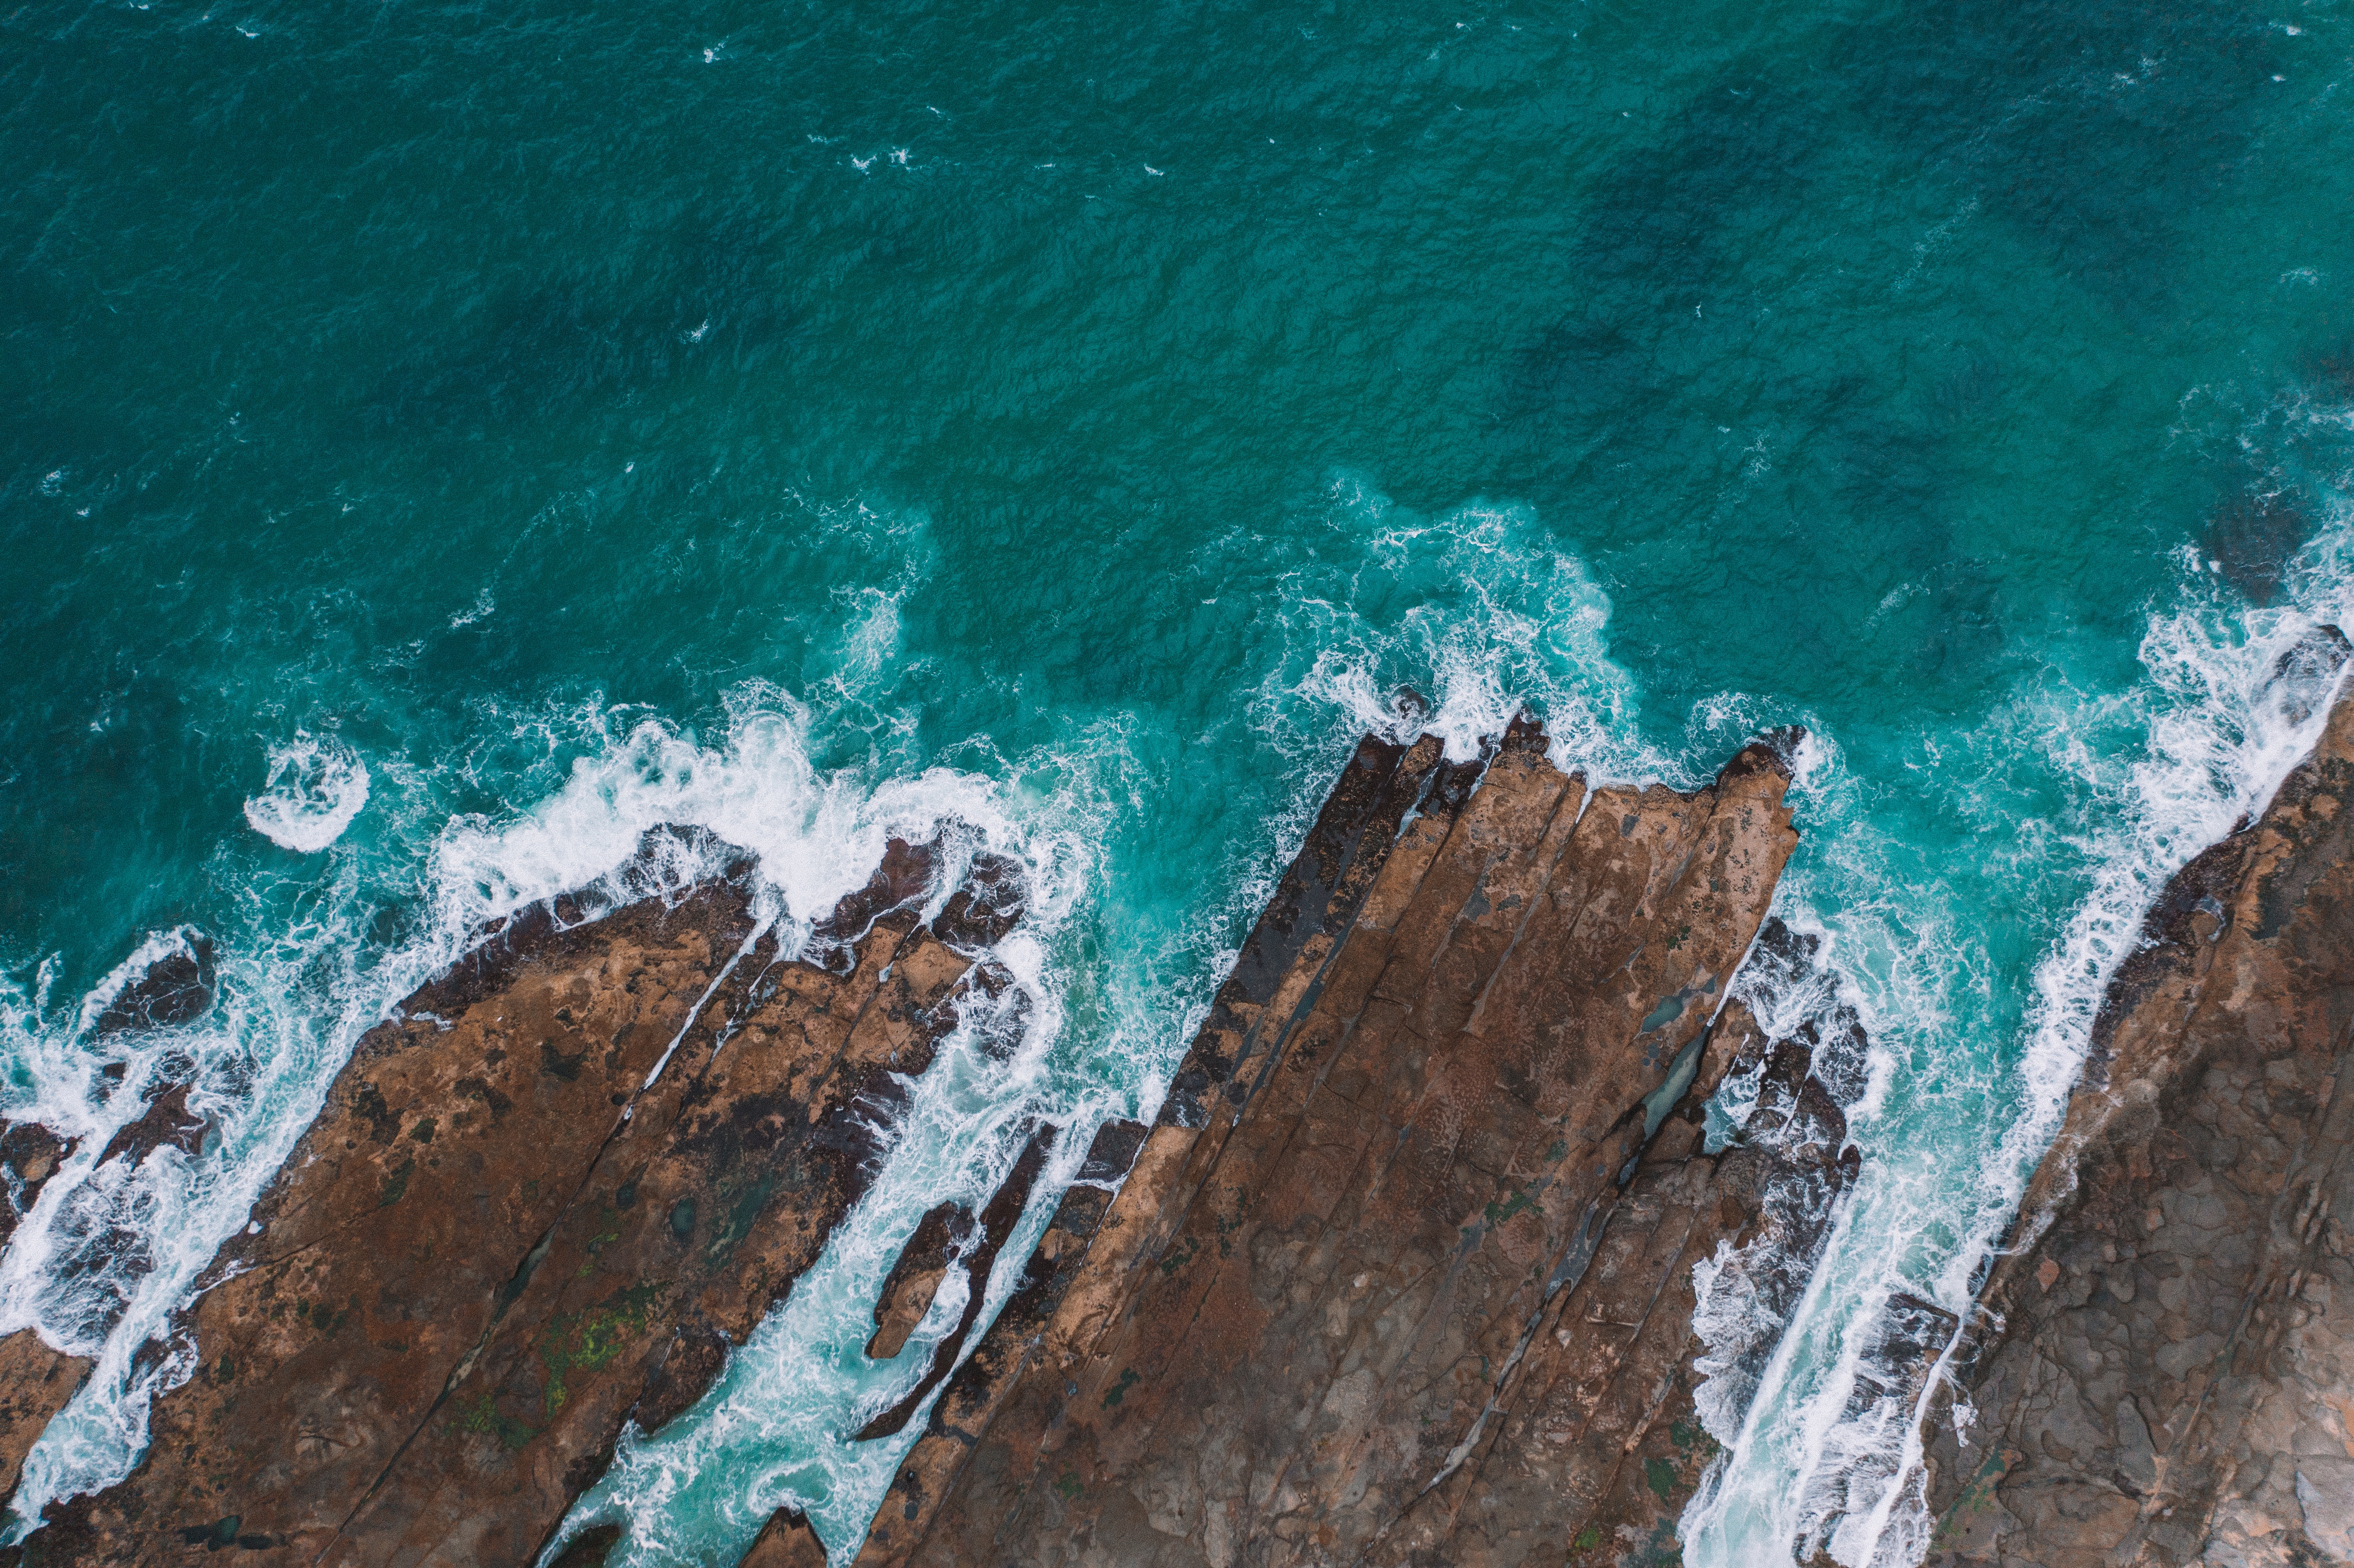 136835 download wallpaper view from above, nature, water, sea, rocks, shore, bank screensavers and pictures for free